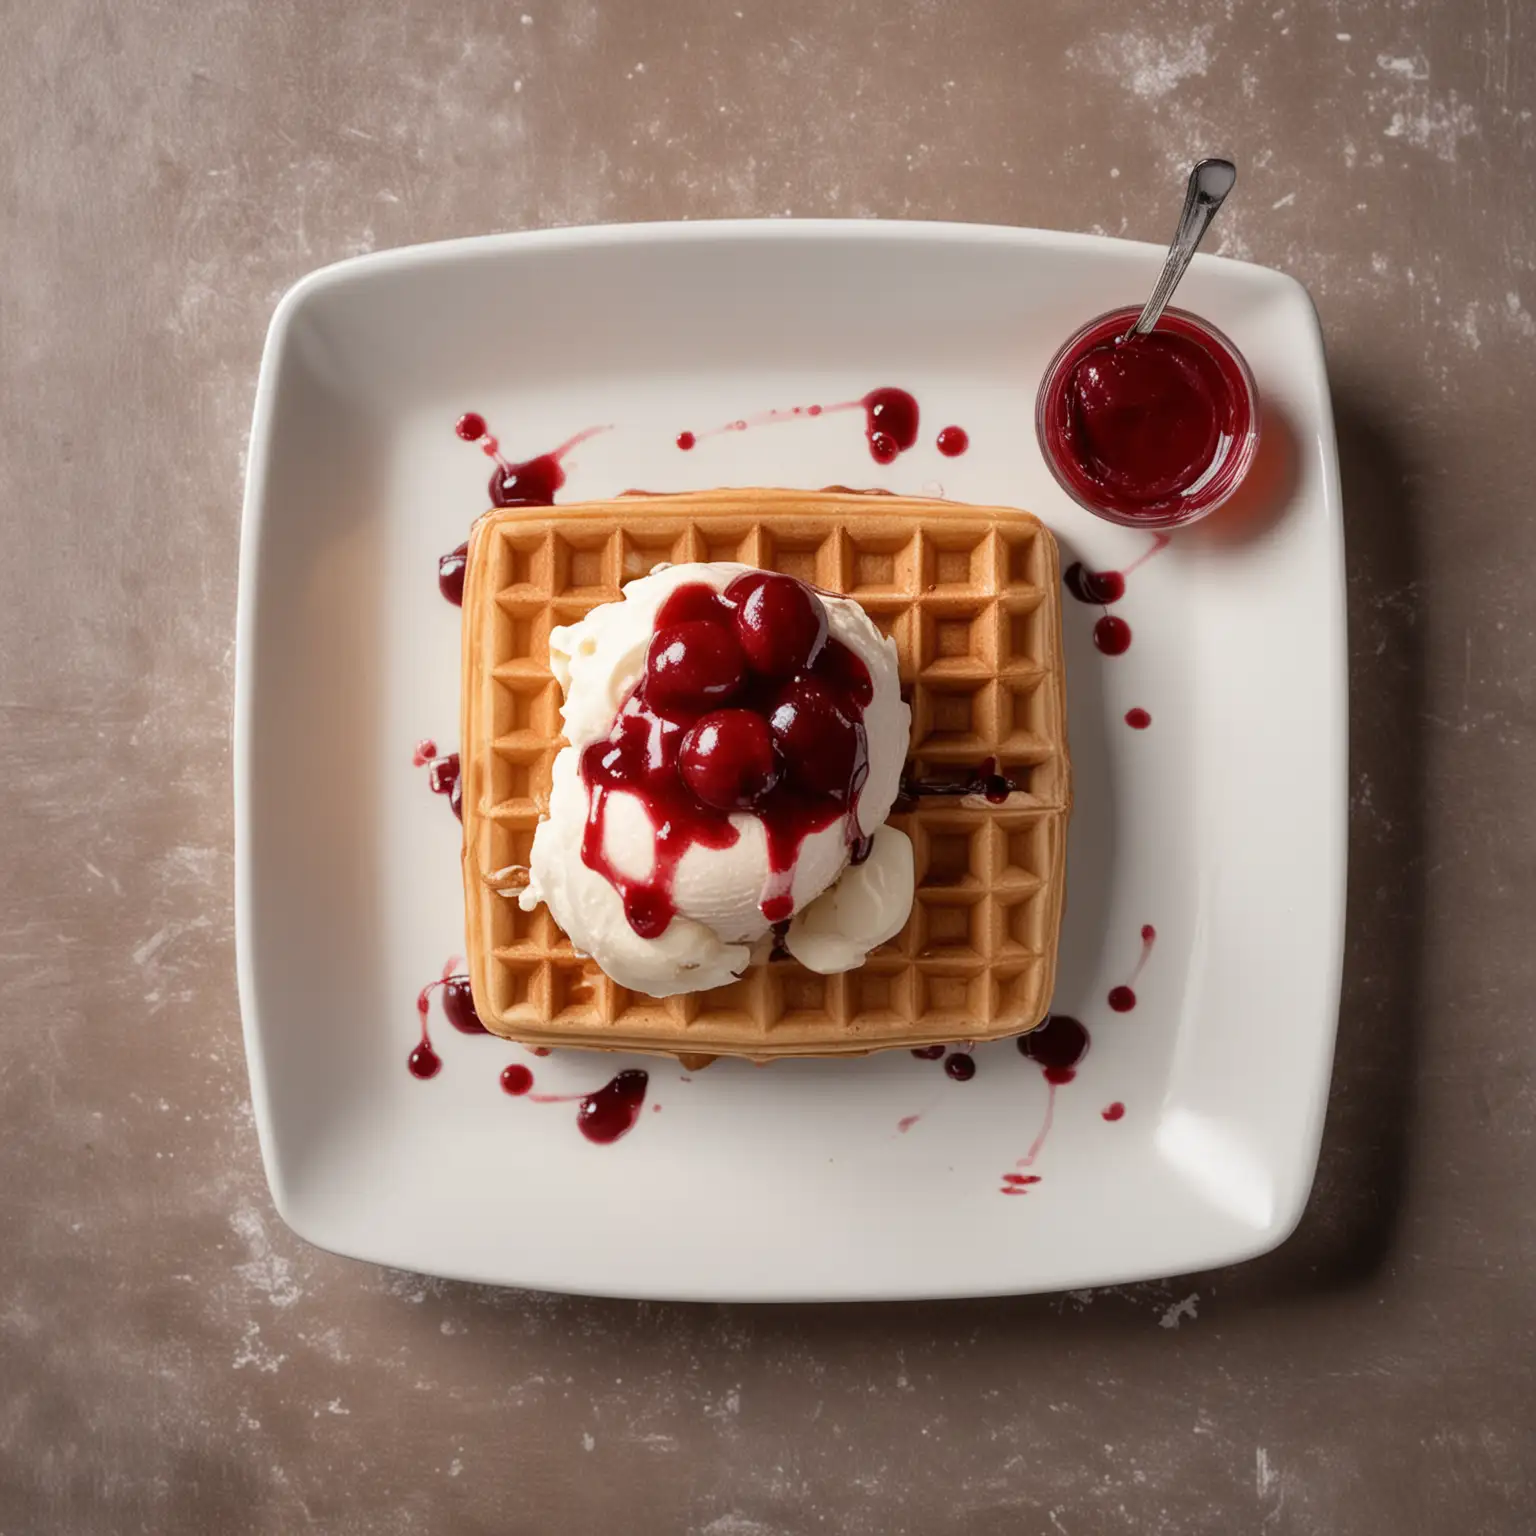 Square-Belgian-Waffle-with-Ice-Cream-and-Cherry-Sauce-on-Plate